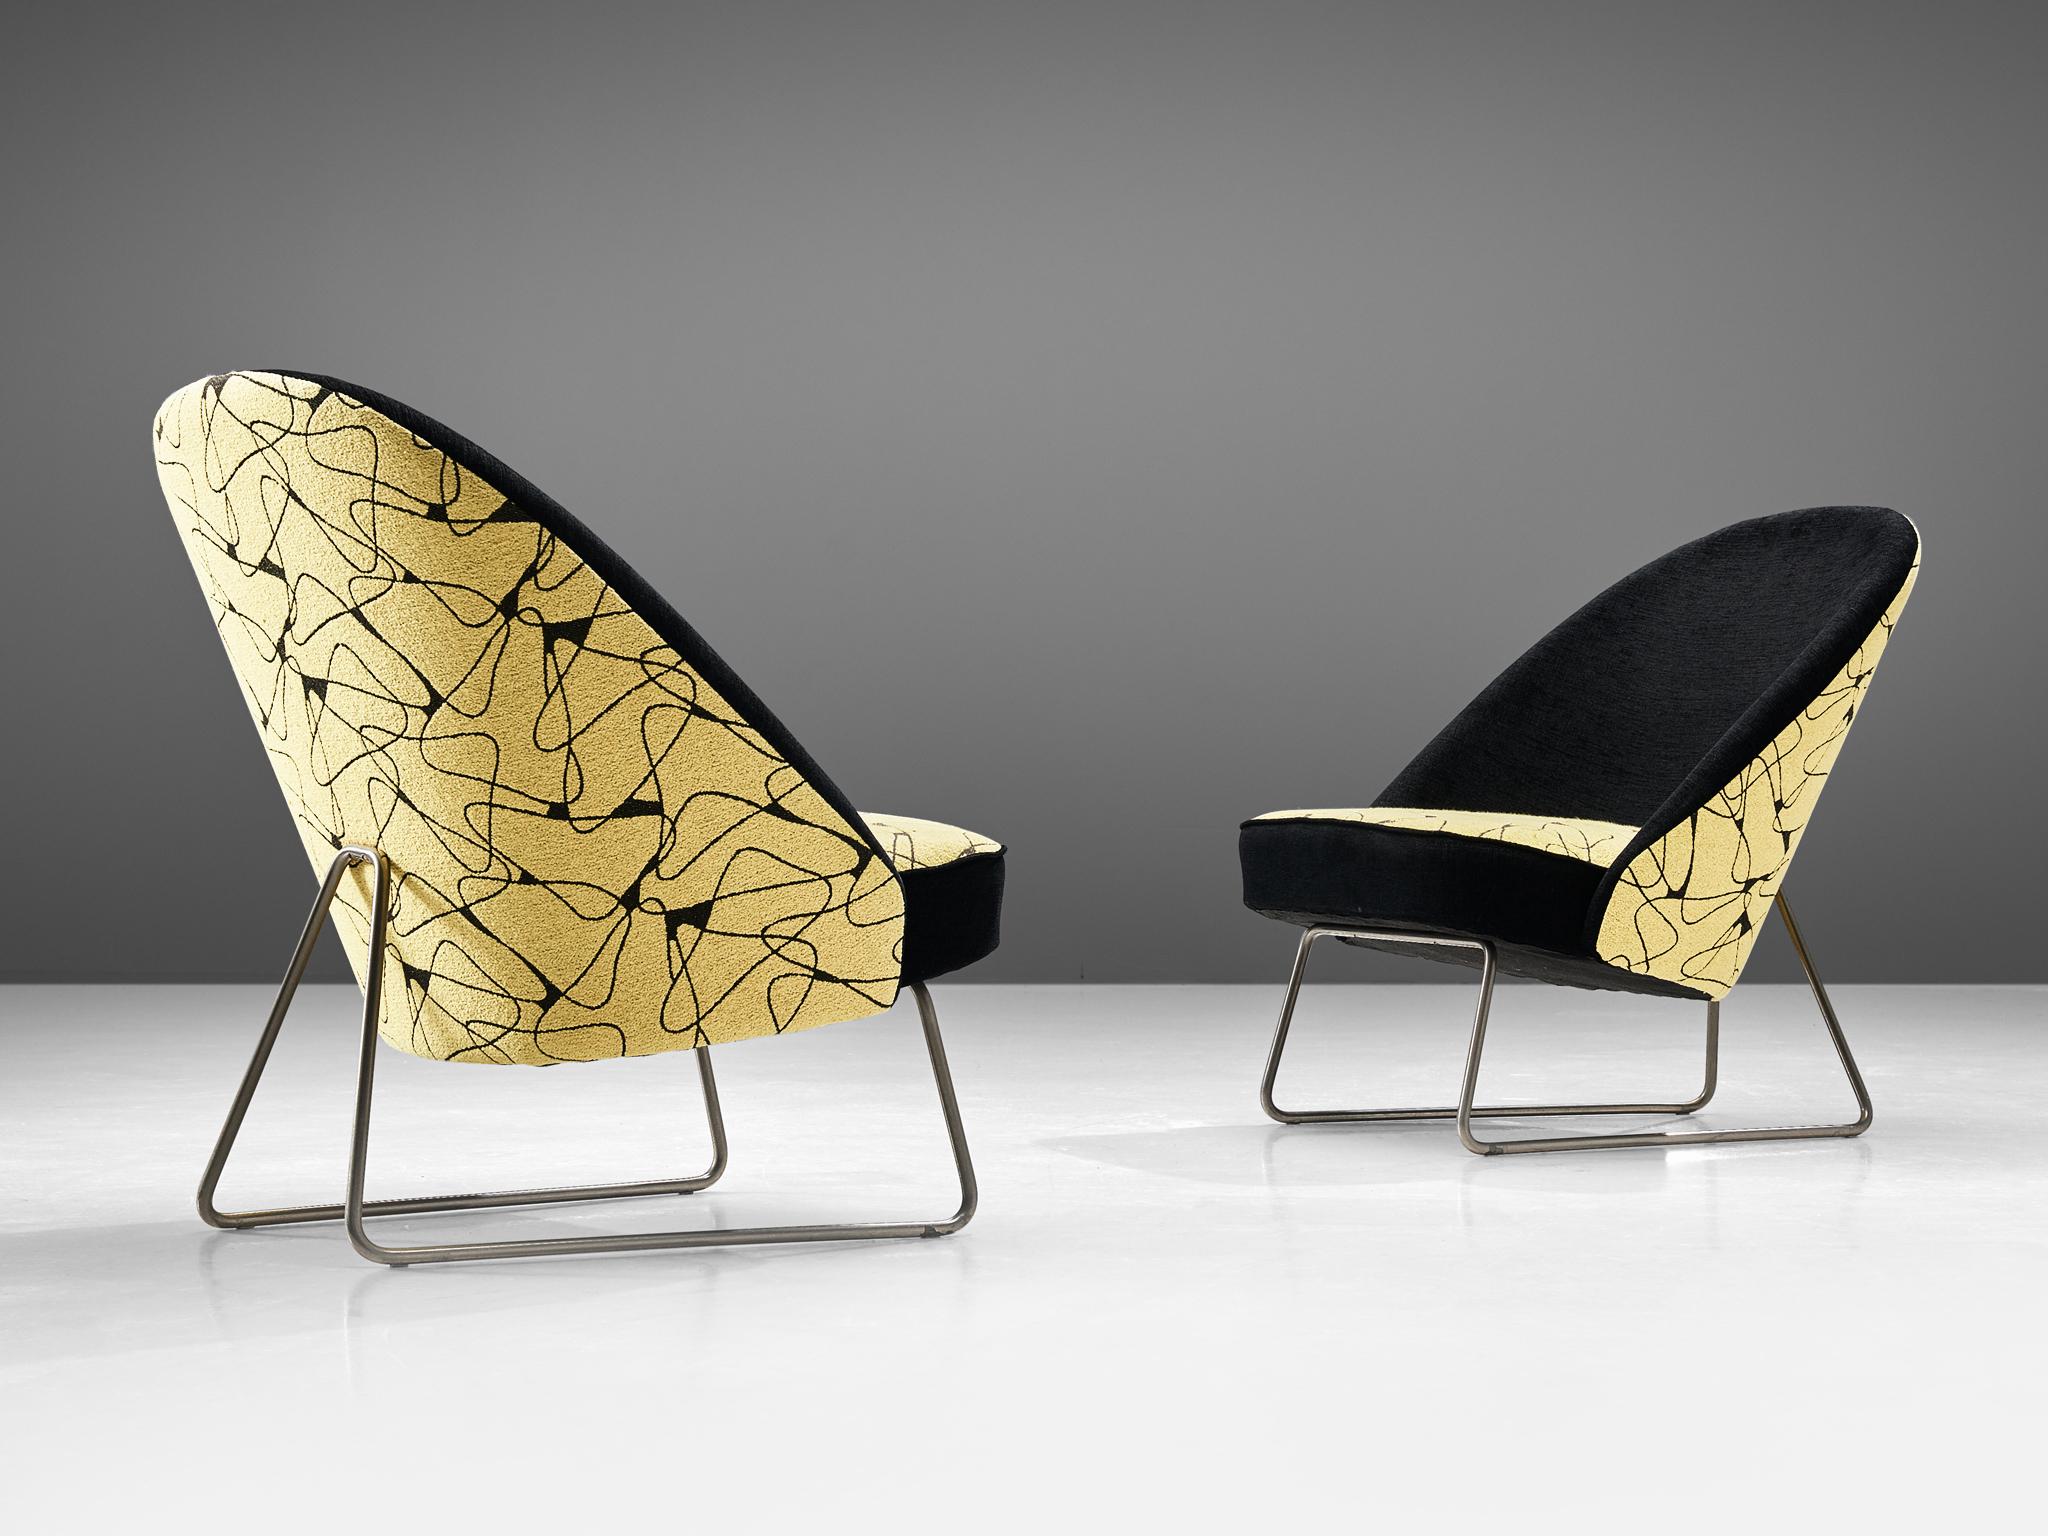 Theo Ruth for Artifort, pair of easy chairs model 115, metal, fabric, the Netherlands, design 1958 

A pair of easy chairs with a metal base, designed by Theo Ruth for the company Artifort. The chairs are upholstered with a midcentury graphic woven